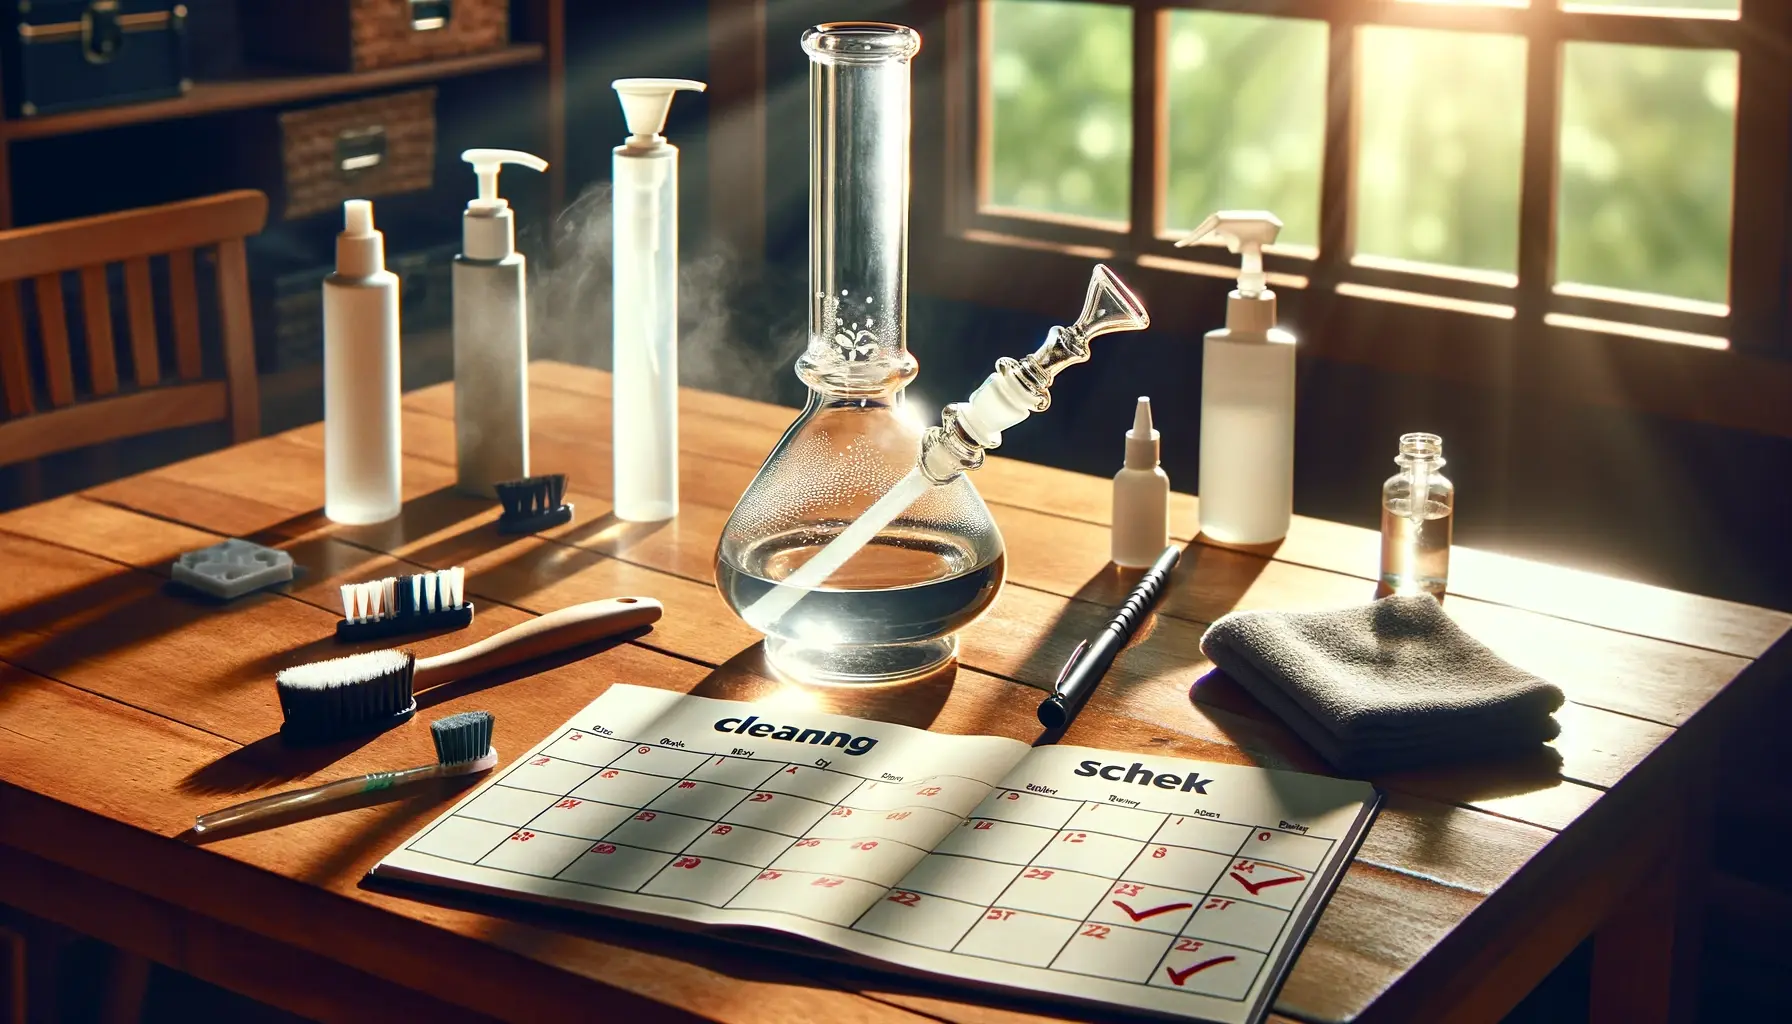 Photo of a sparkling clean glass bong on a wooden table with sunlight filtering through a nearby window. Beside the bong, there's an open calendar with marked dates every week, highlighting a cleaning schedule. Various cleaning tools, such as brushes and cleaning solutions, are neatly arranged next to the bong.